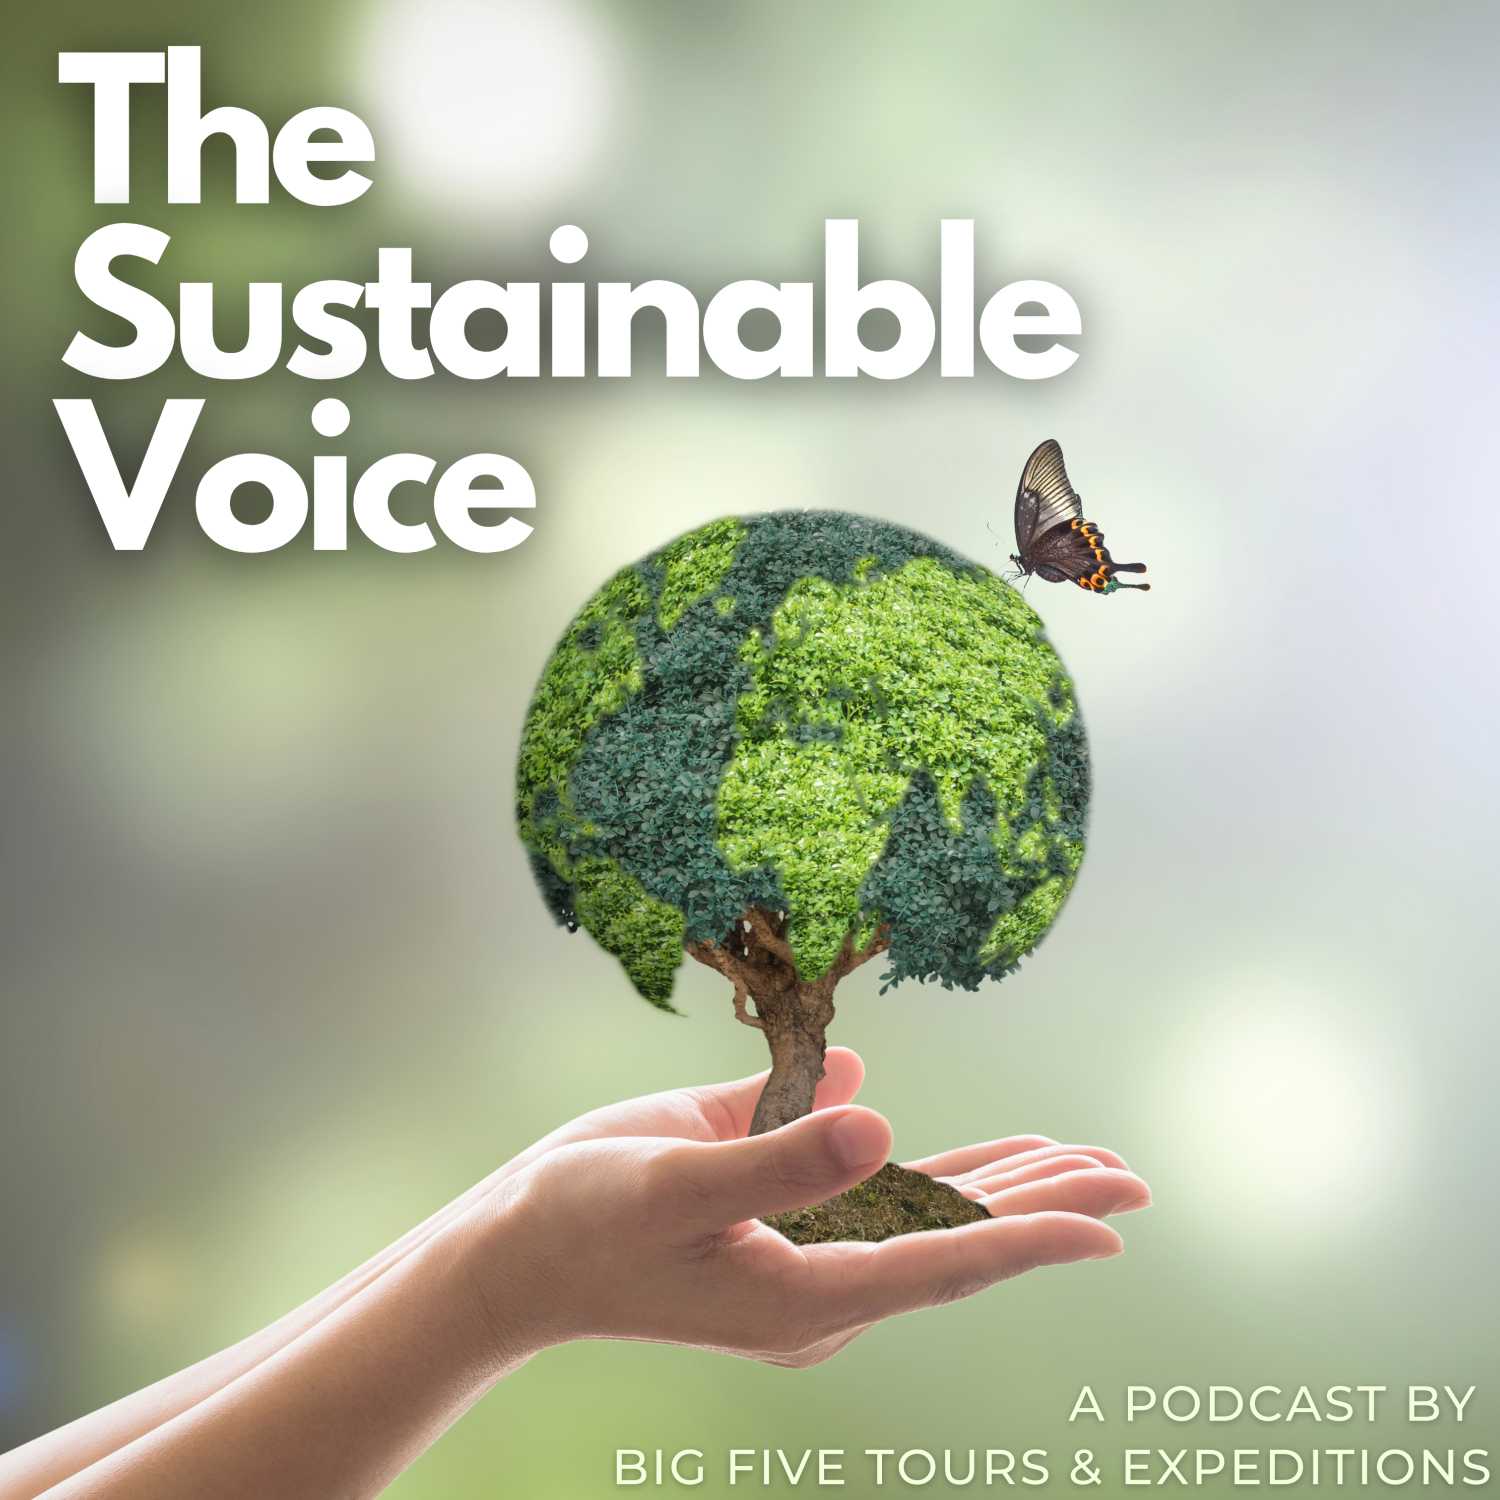 The Sustainable Voice Presented by Big Five Tours & Expeditions